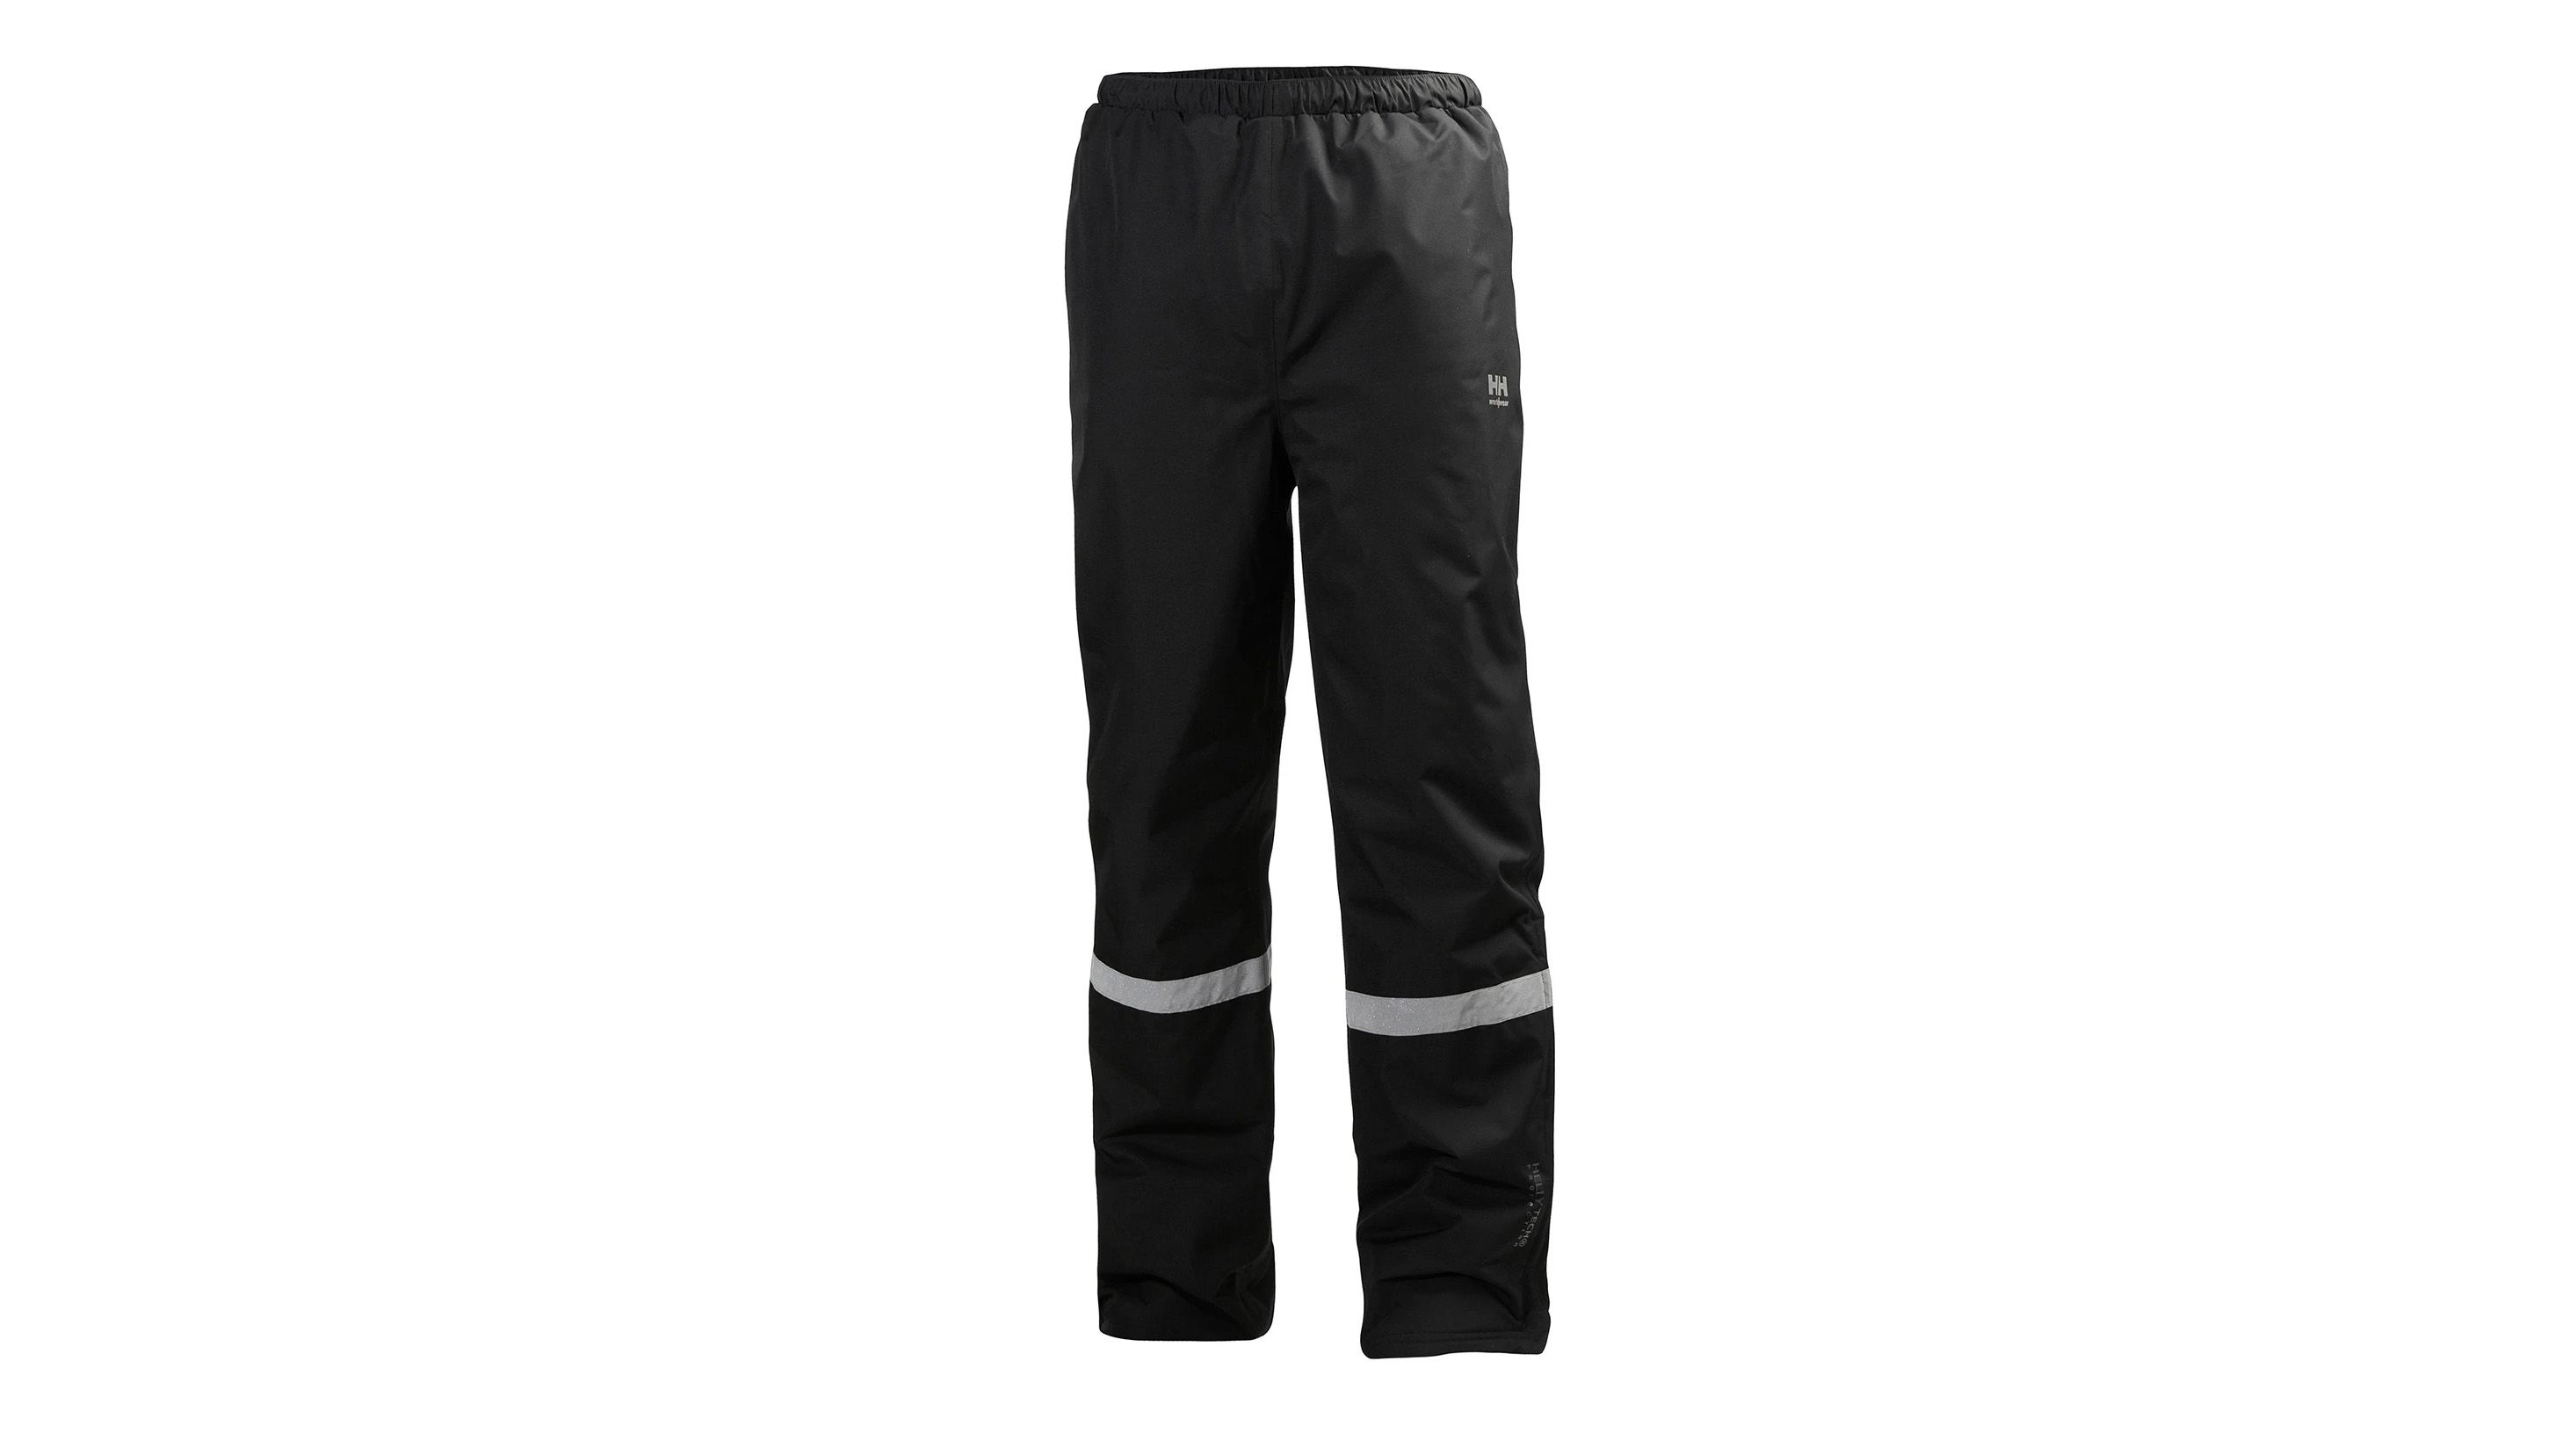 10 best waterproof trousers for women 2023 UK: tried and tested